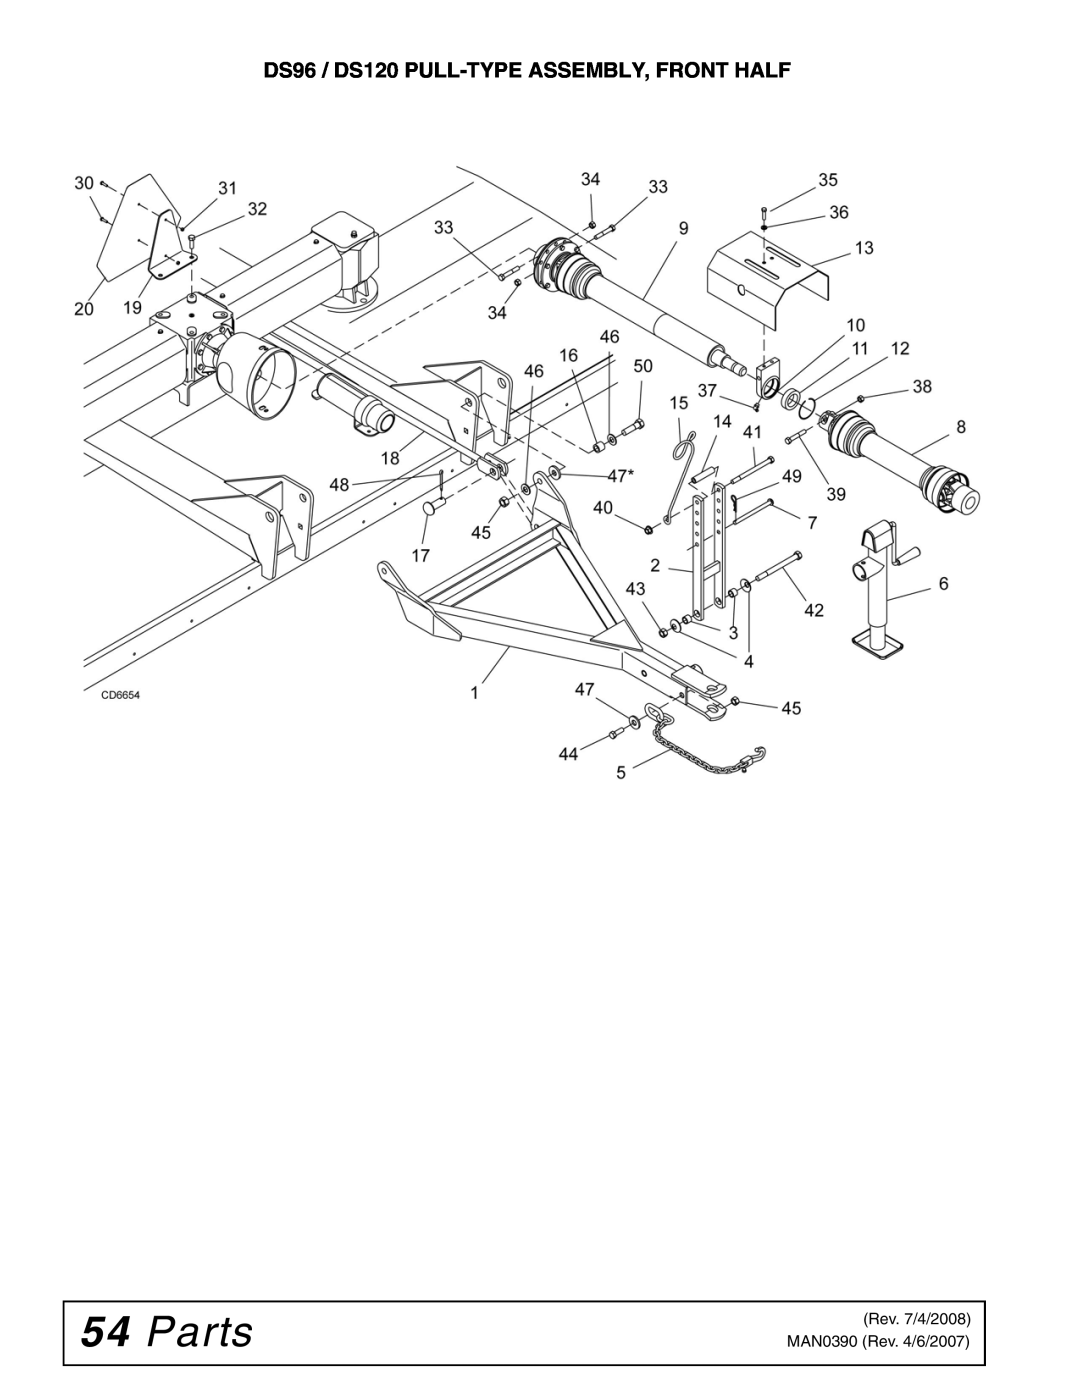 Woods Equipment manual Parts, DS96 / DS120 PULL-TYPE ASSEMBLY, FRONT HALF 